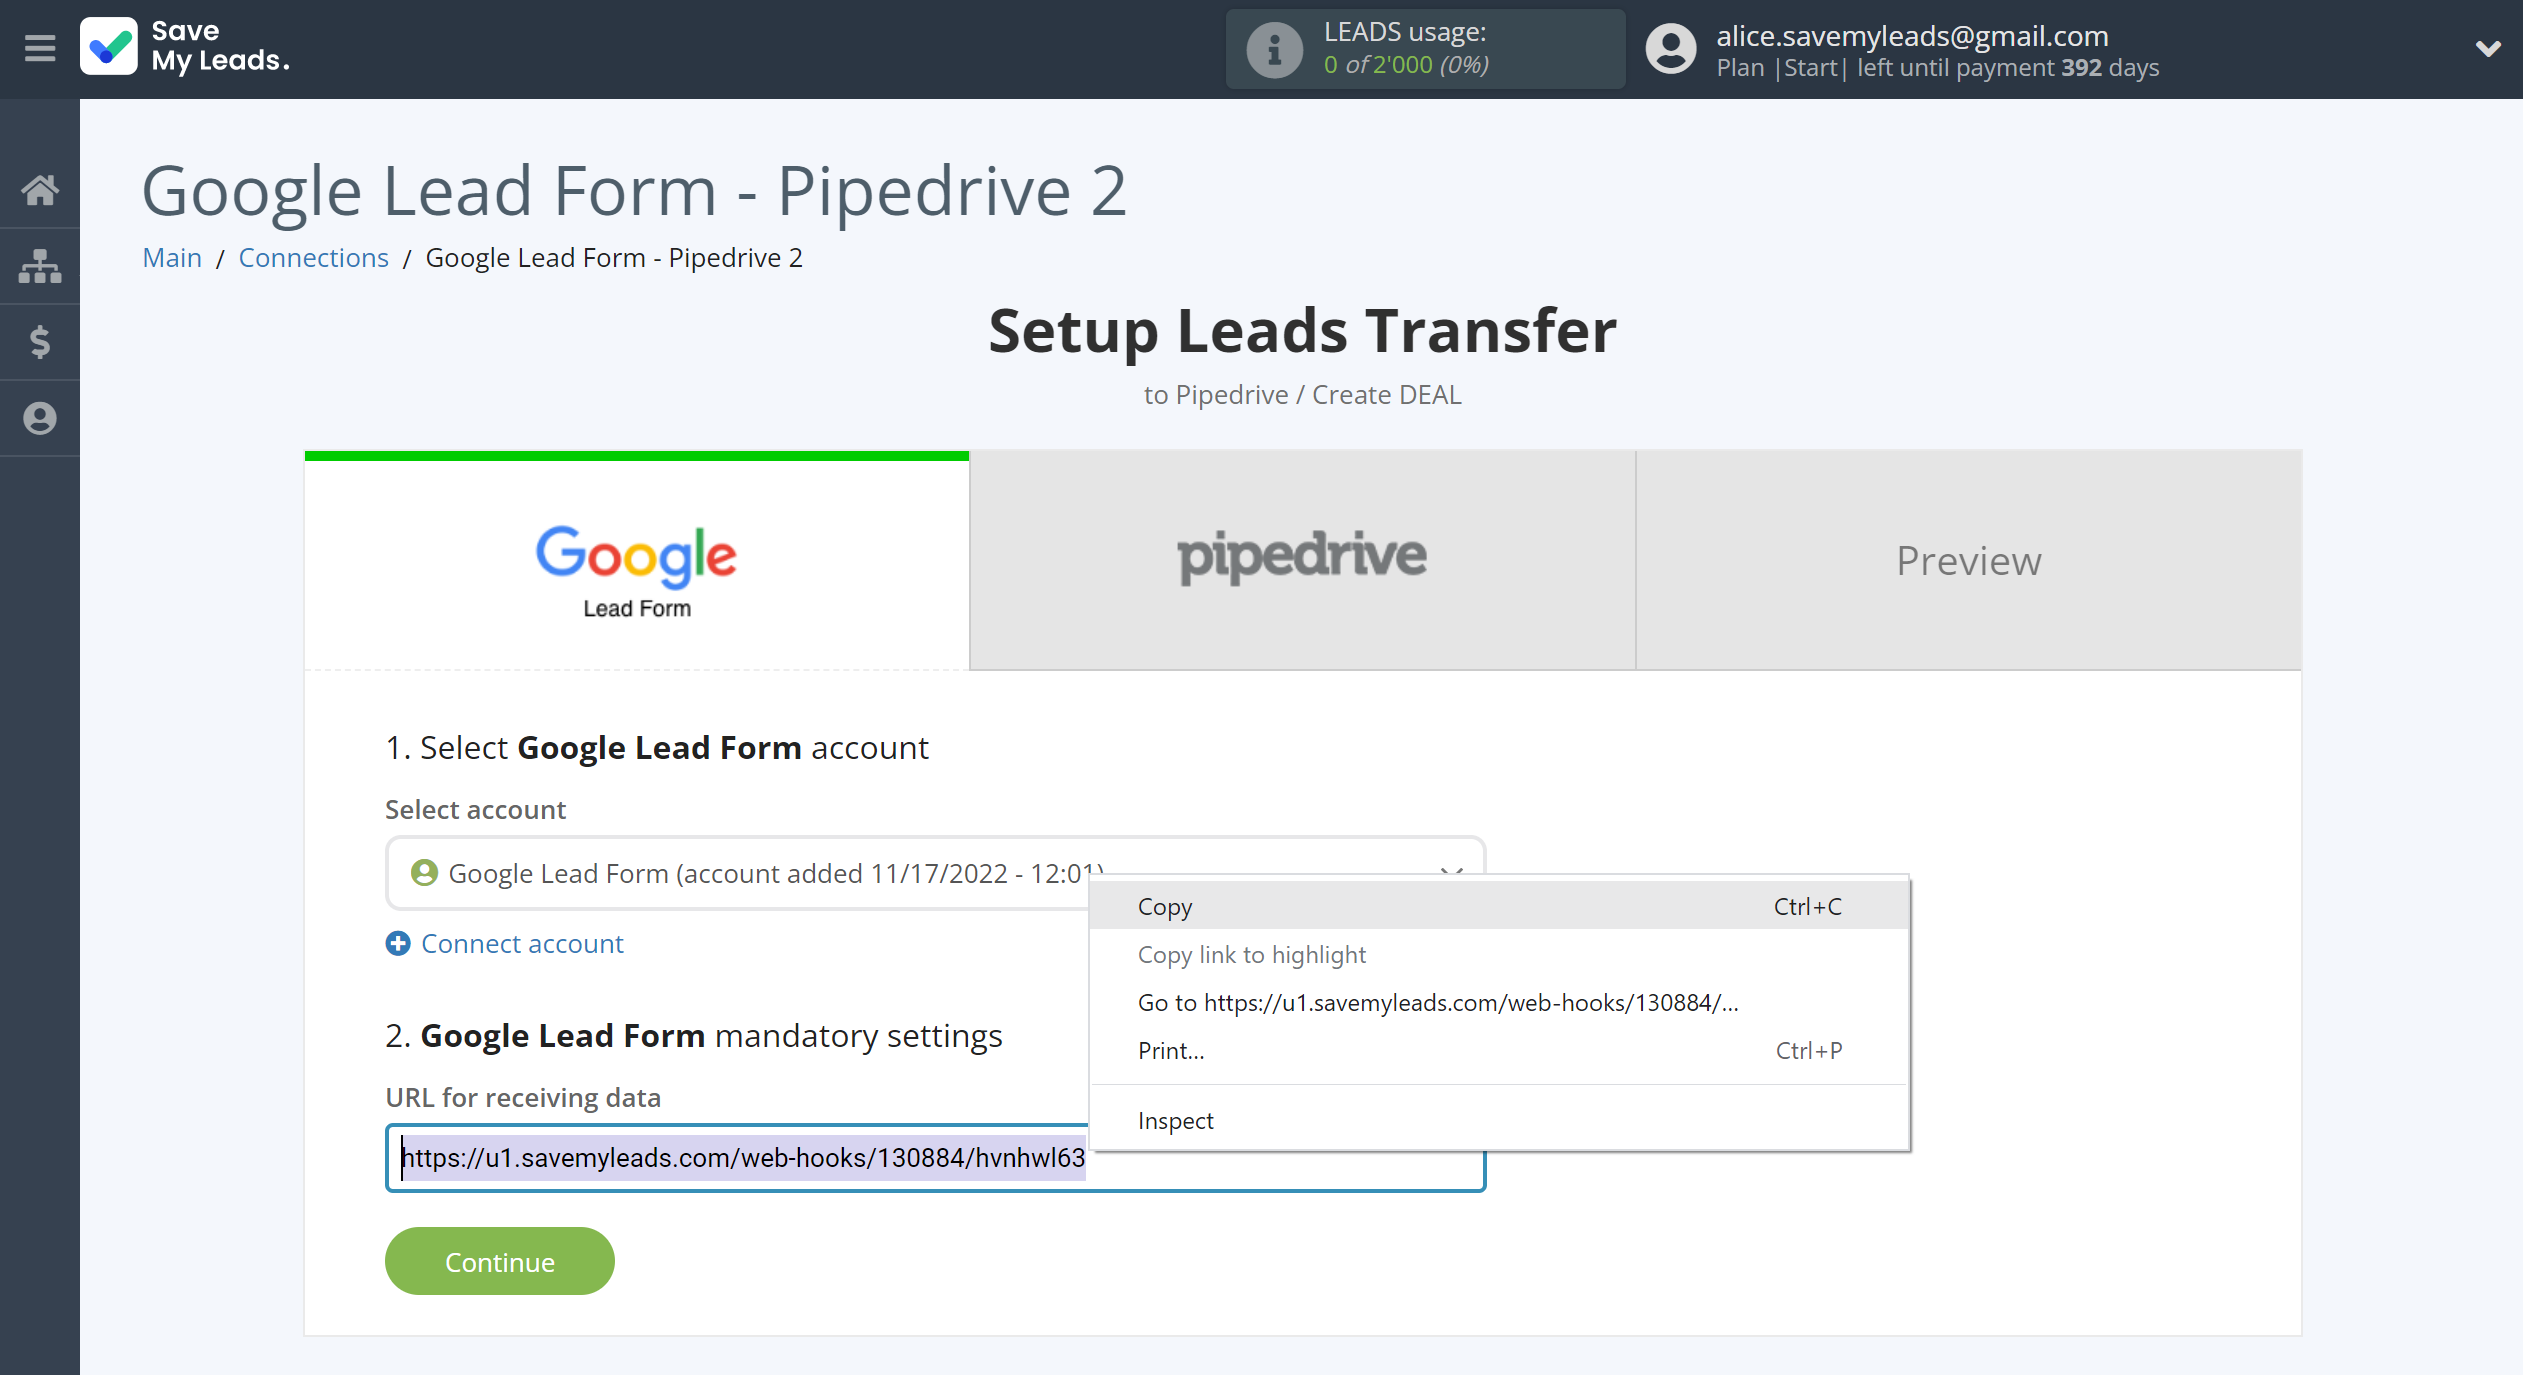 How to Connect Google Lead Form with Pipedrive Create Deal | Data Source account connection